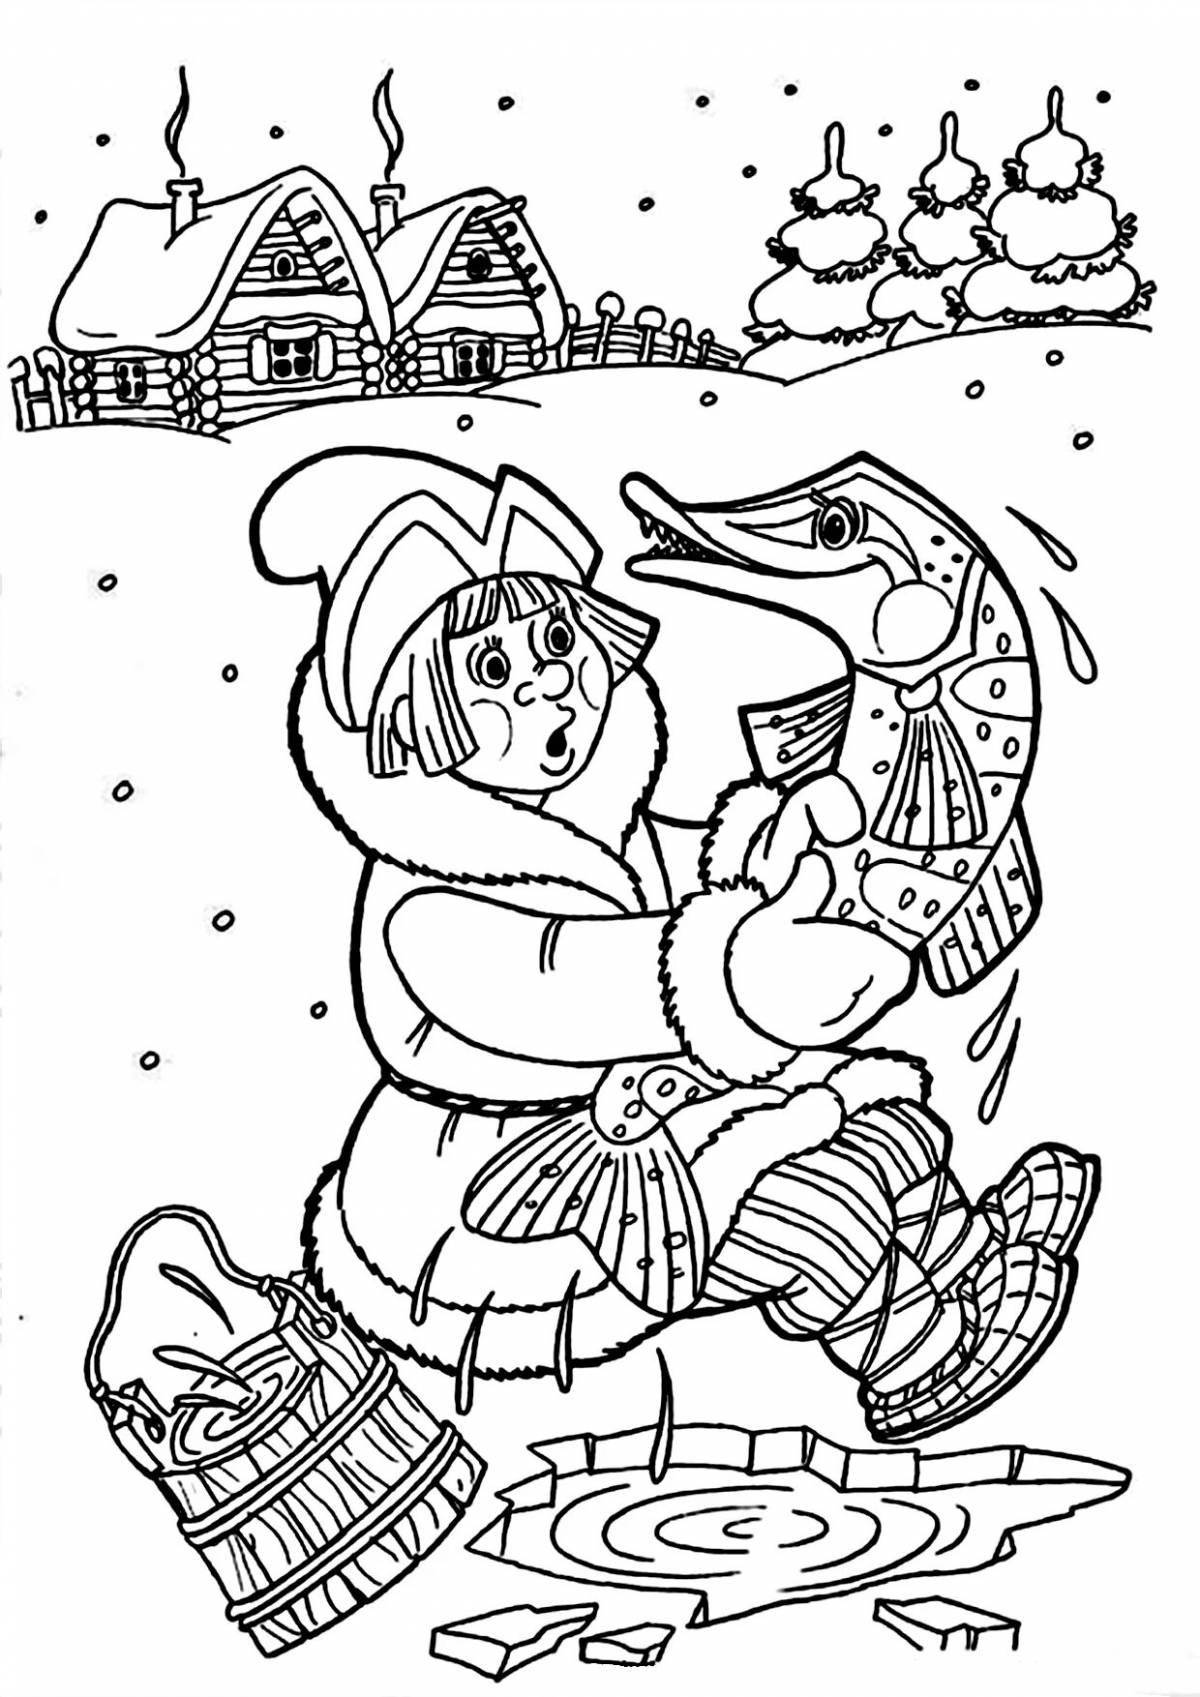 Joyful coloring pages heroes of fairy tales